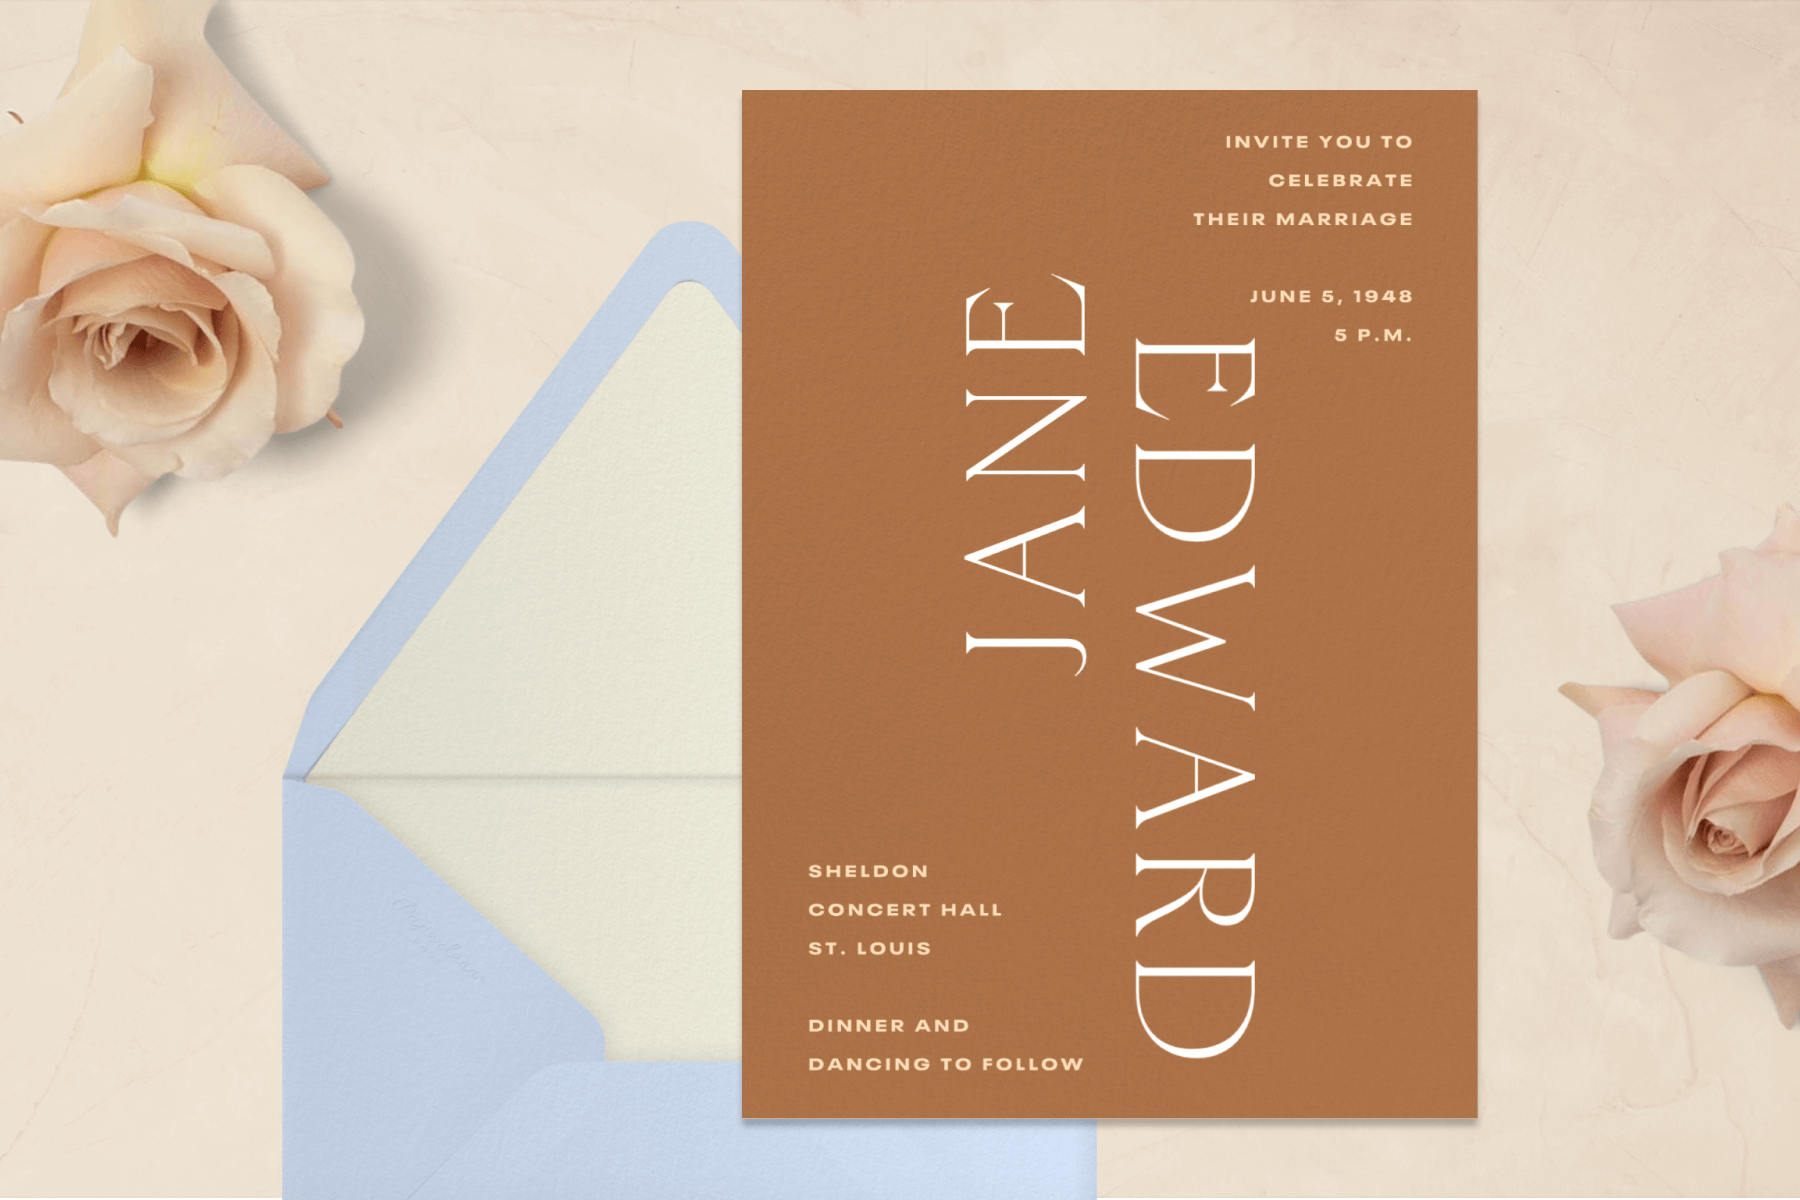 A burnt orange wedding invitation featuring the couple’s names in centered vertical typography.